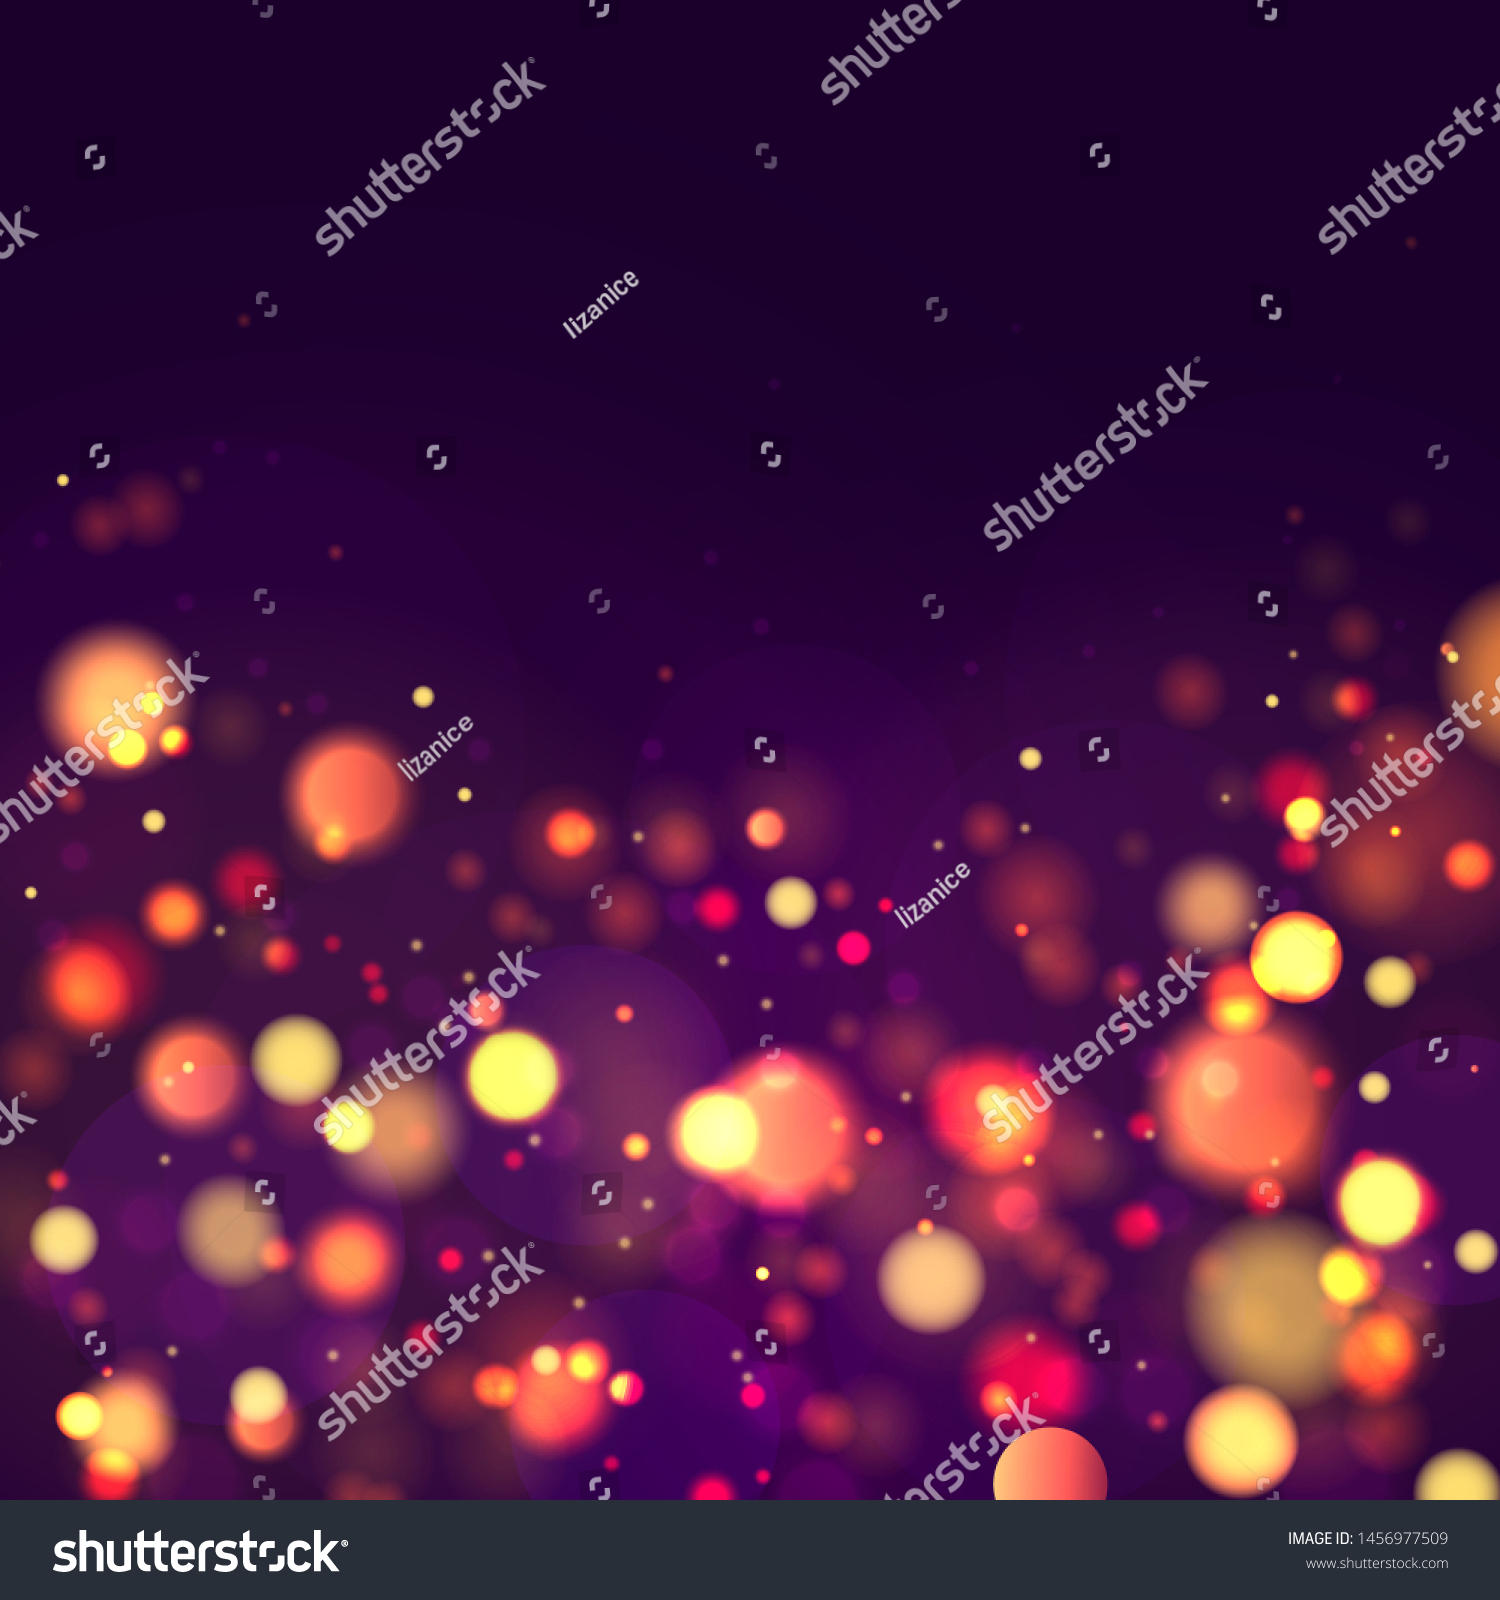 Festive purple and golden luminous background with colorful lights bokeh. Christmas concept Xmas greeting card. Magic holiday poster, banner. Night bright gold sparkles Vector Light abstract #1456977509